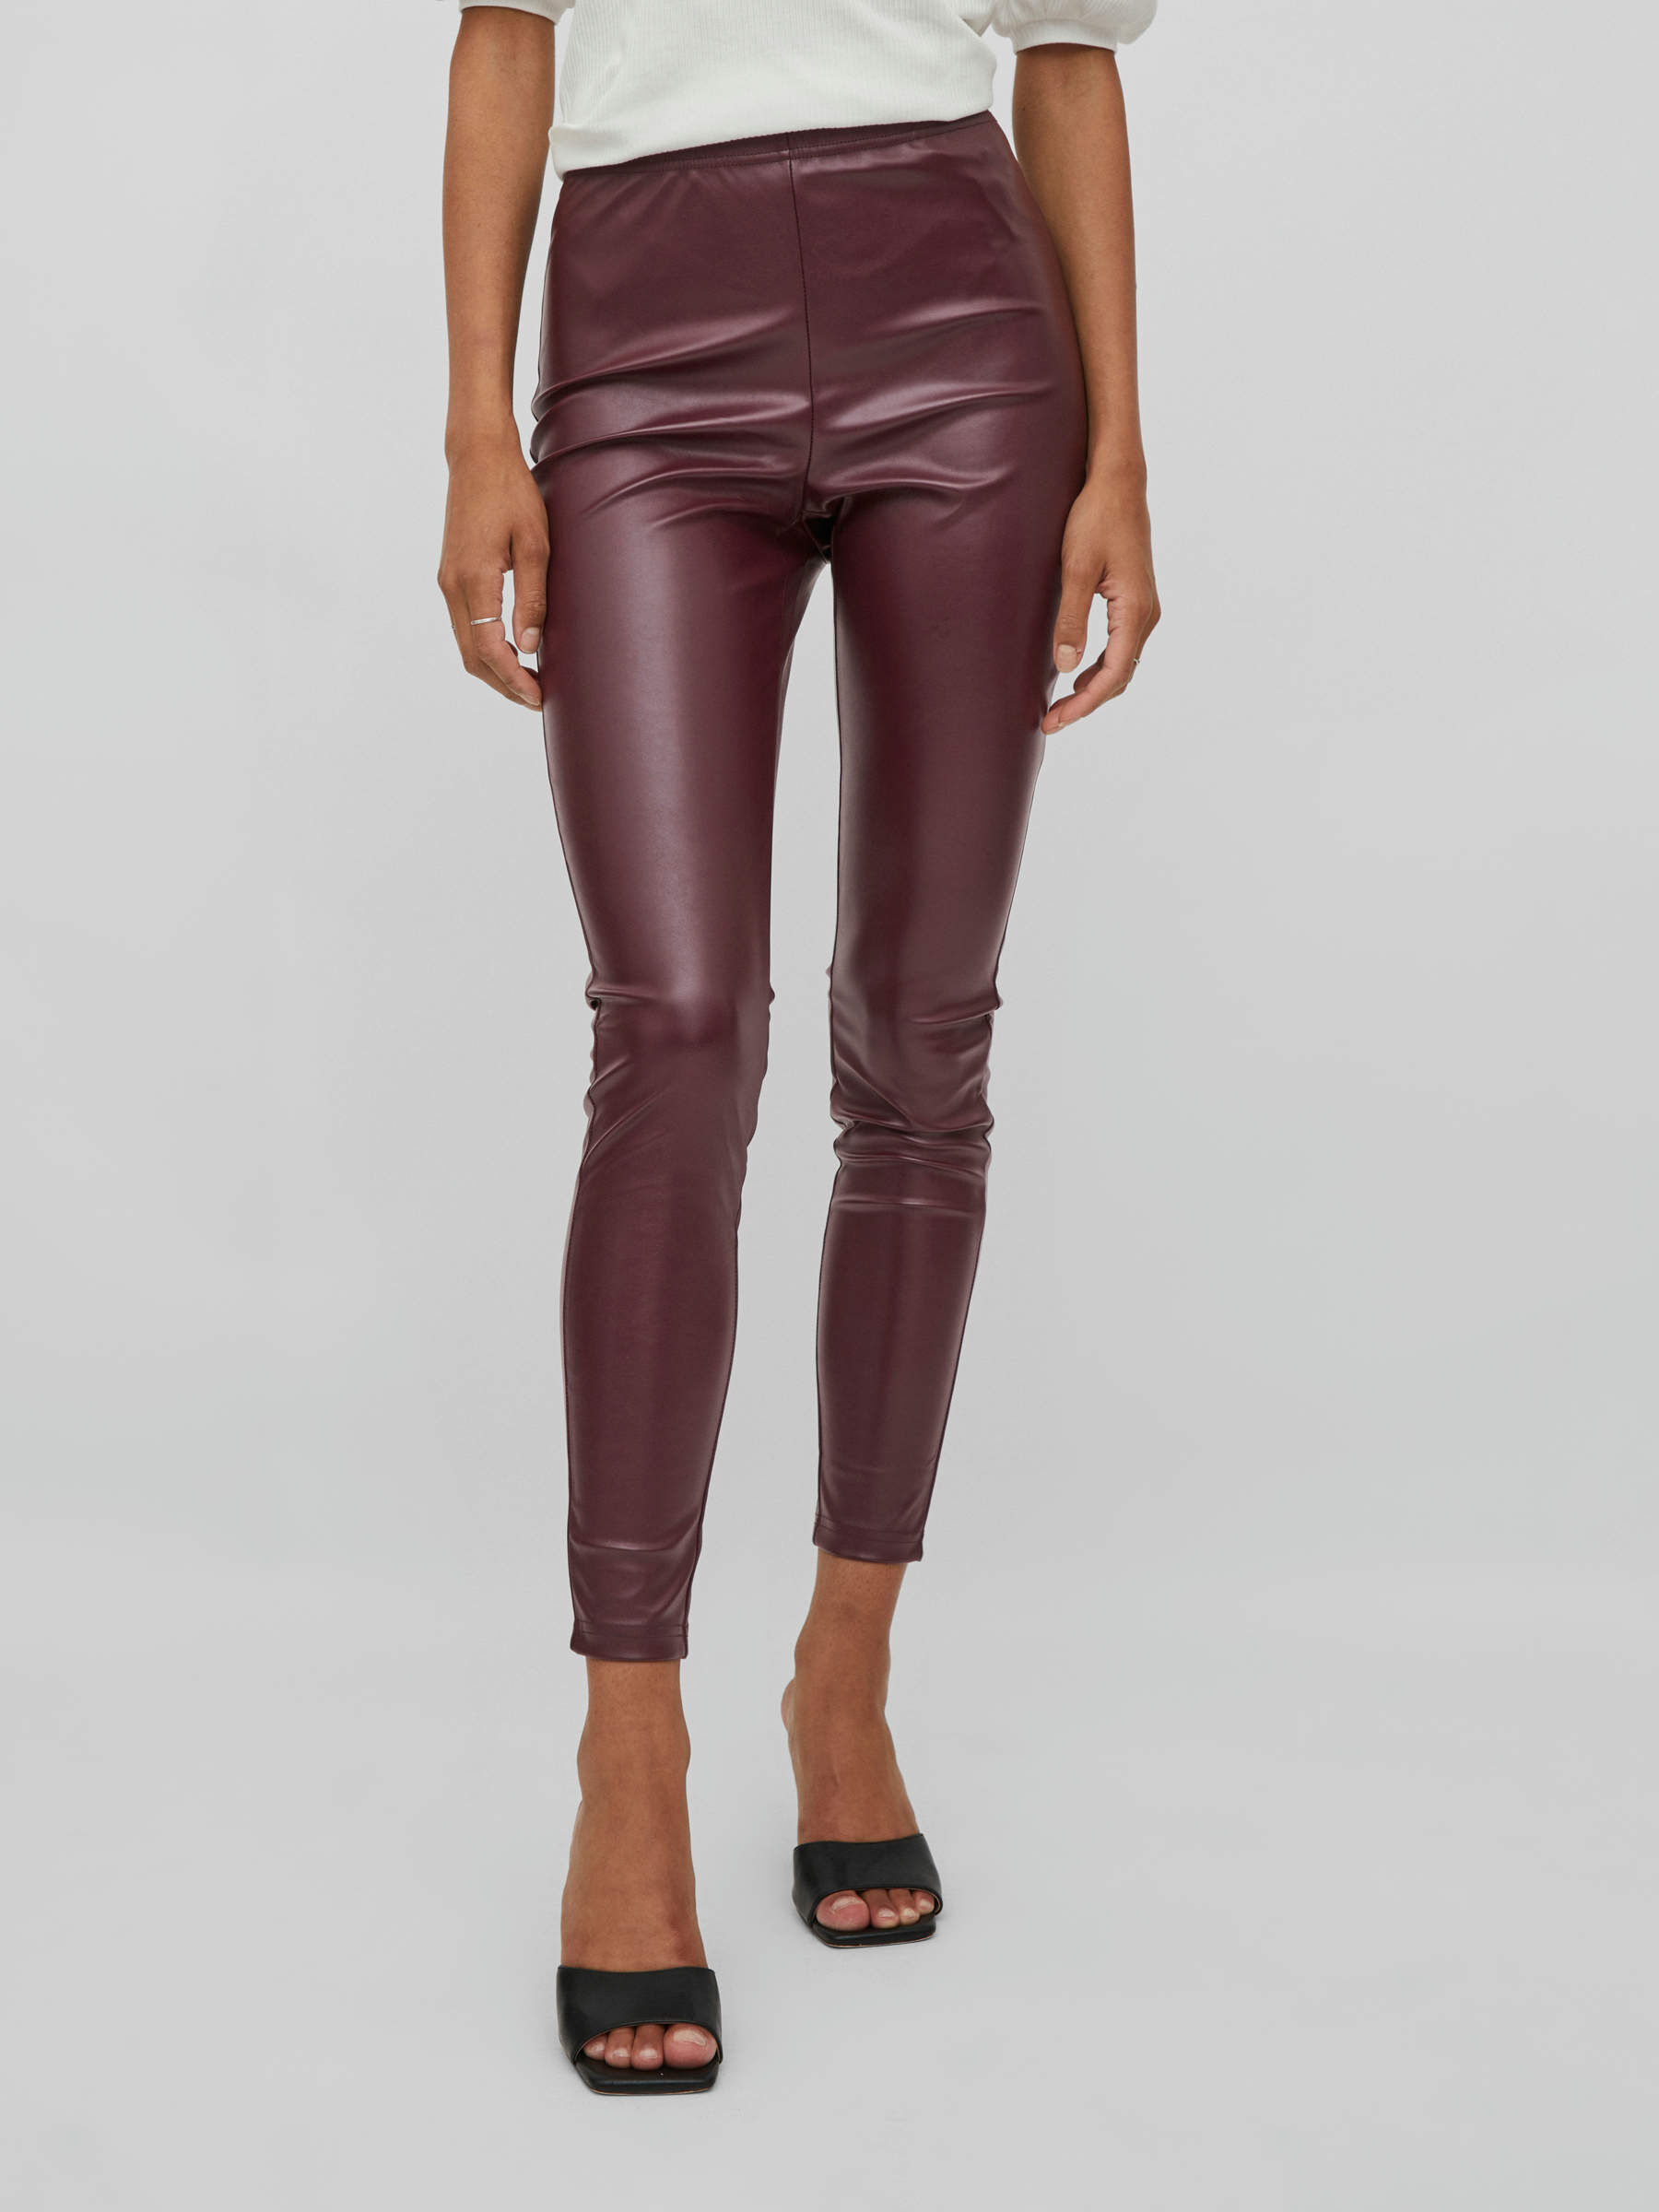 Buy N /C Women PU Long Leather Pants Leggings Bow Pencil with Belt Skinny  Stretchy Tight Trousers (Wine red, S) at Amazon.in